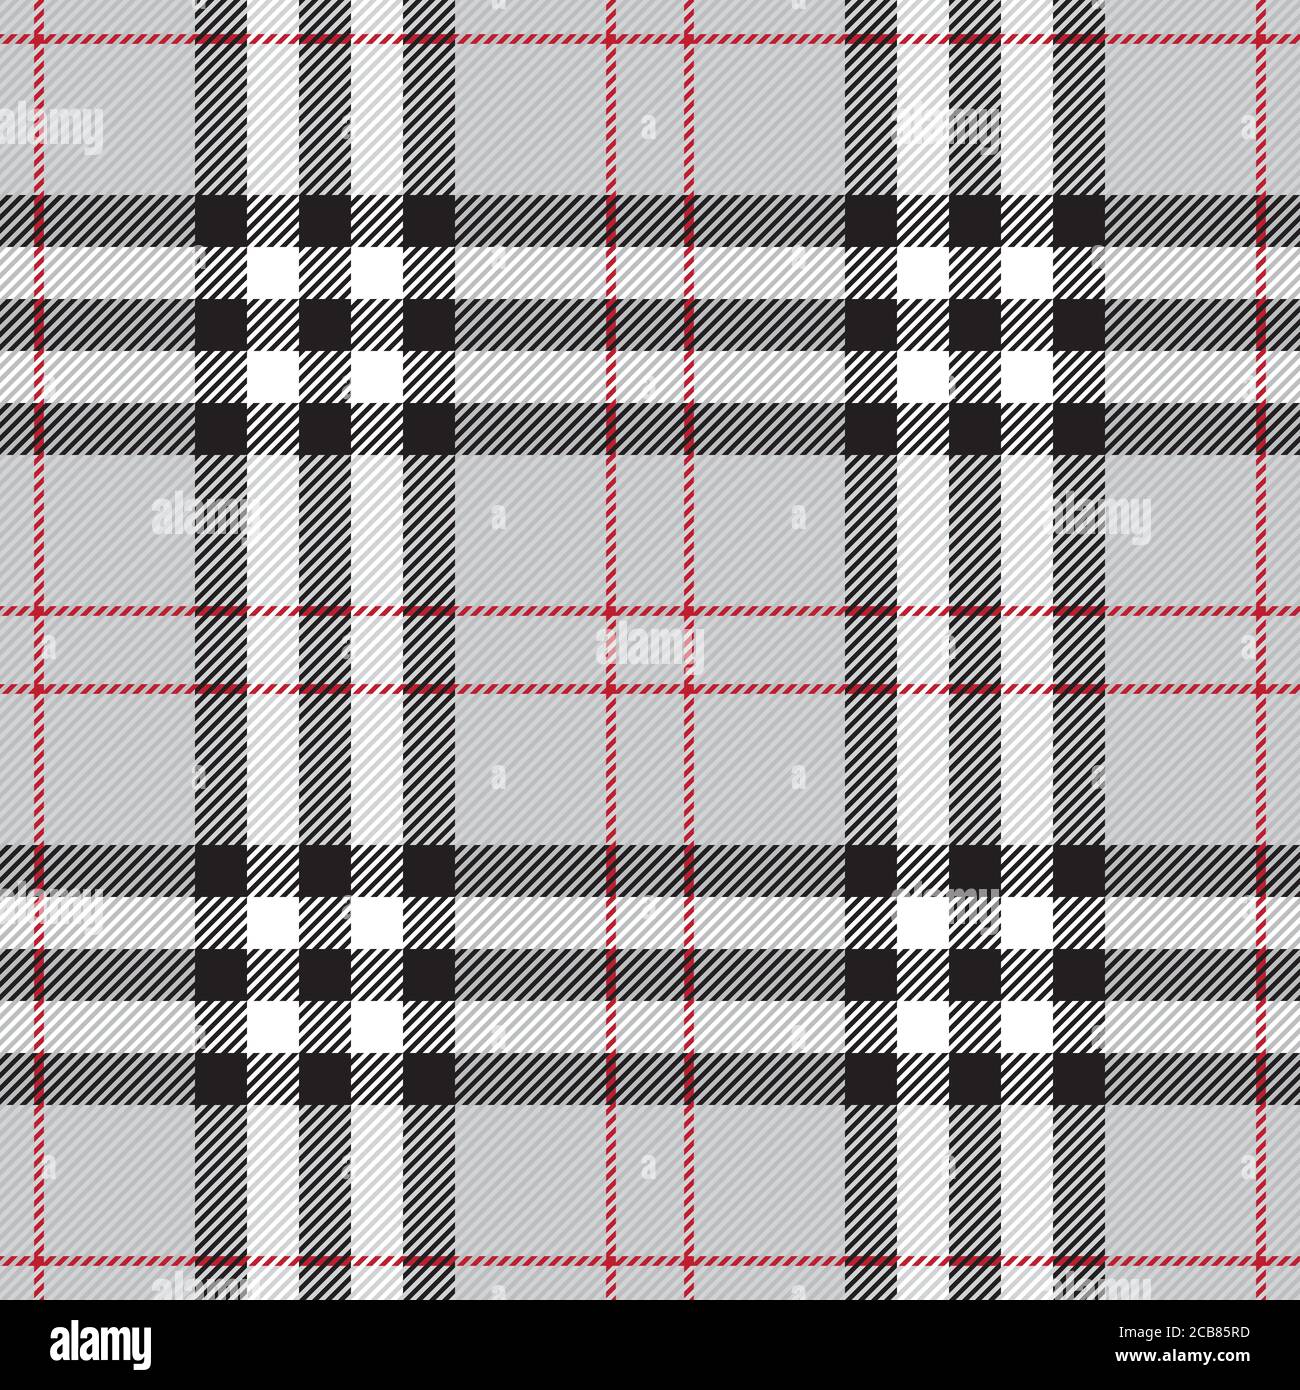 Vintage tartan texture seamless pattern. Traditional Scottish checkered plaid ornament. Coloured geometric intersecting striped vector illustration. Stock Vector